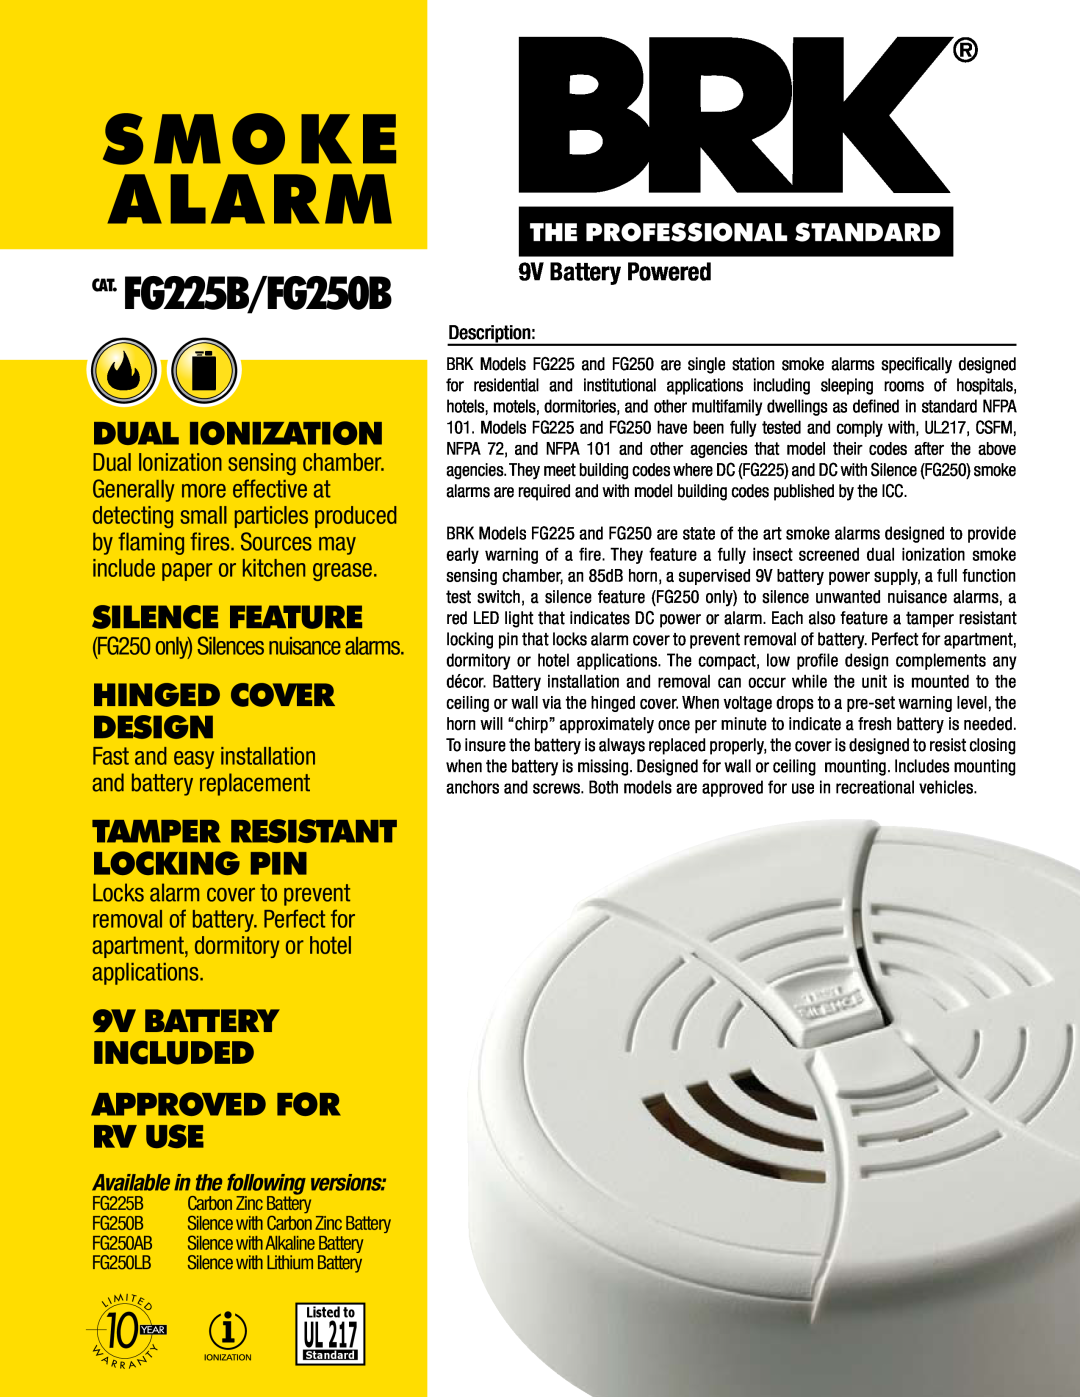 BRK electronic FG250B manual Fast and easy installation and battery replacement, FG250 only Silences nuisance alarms 